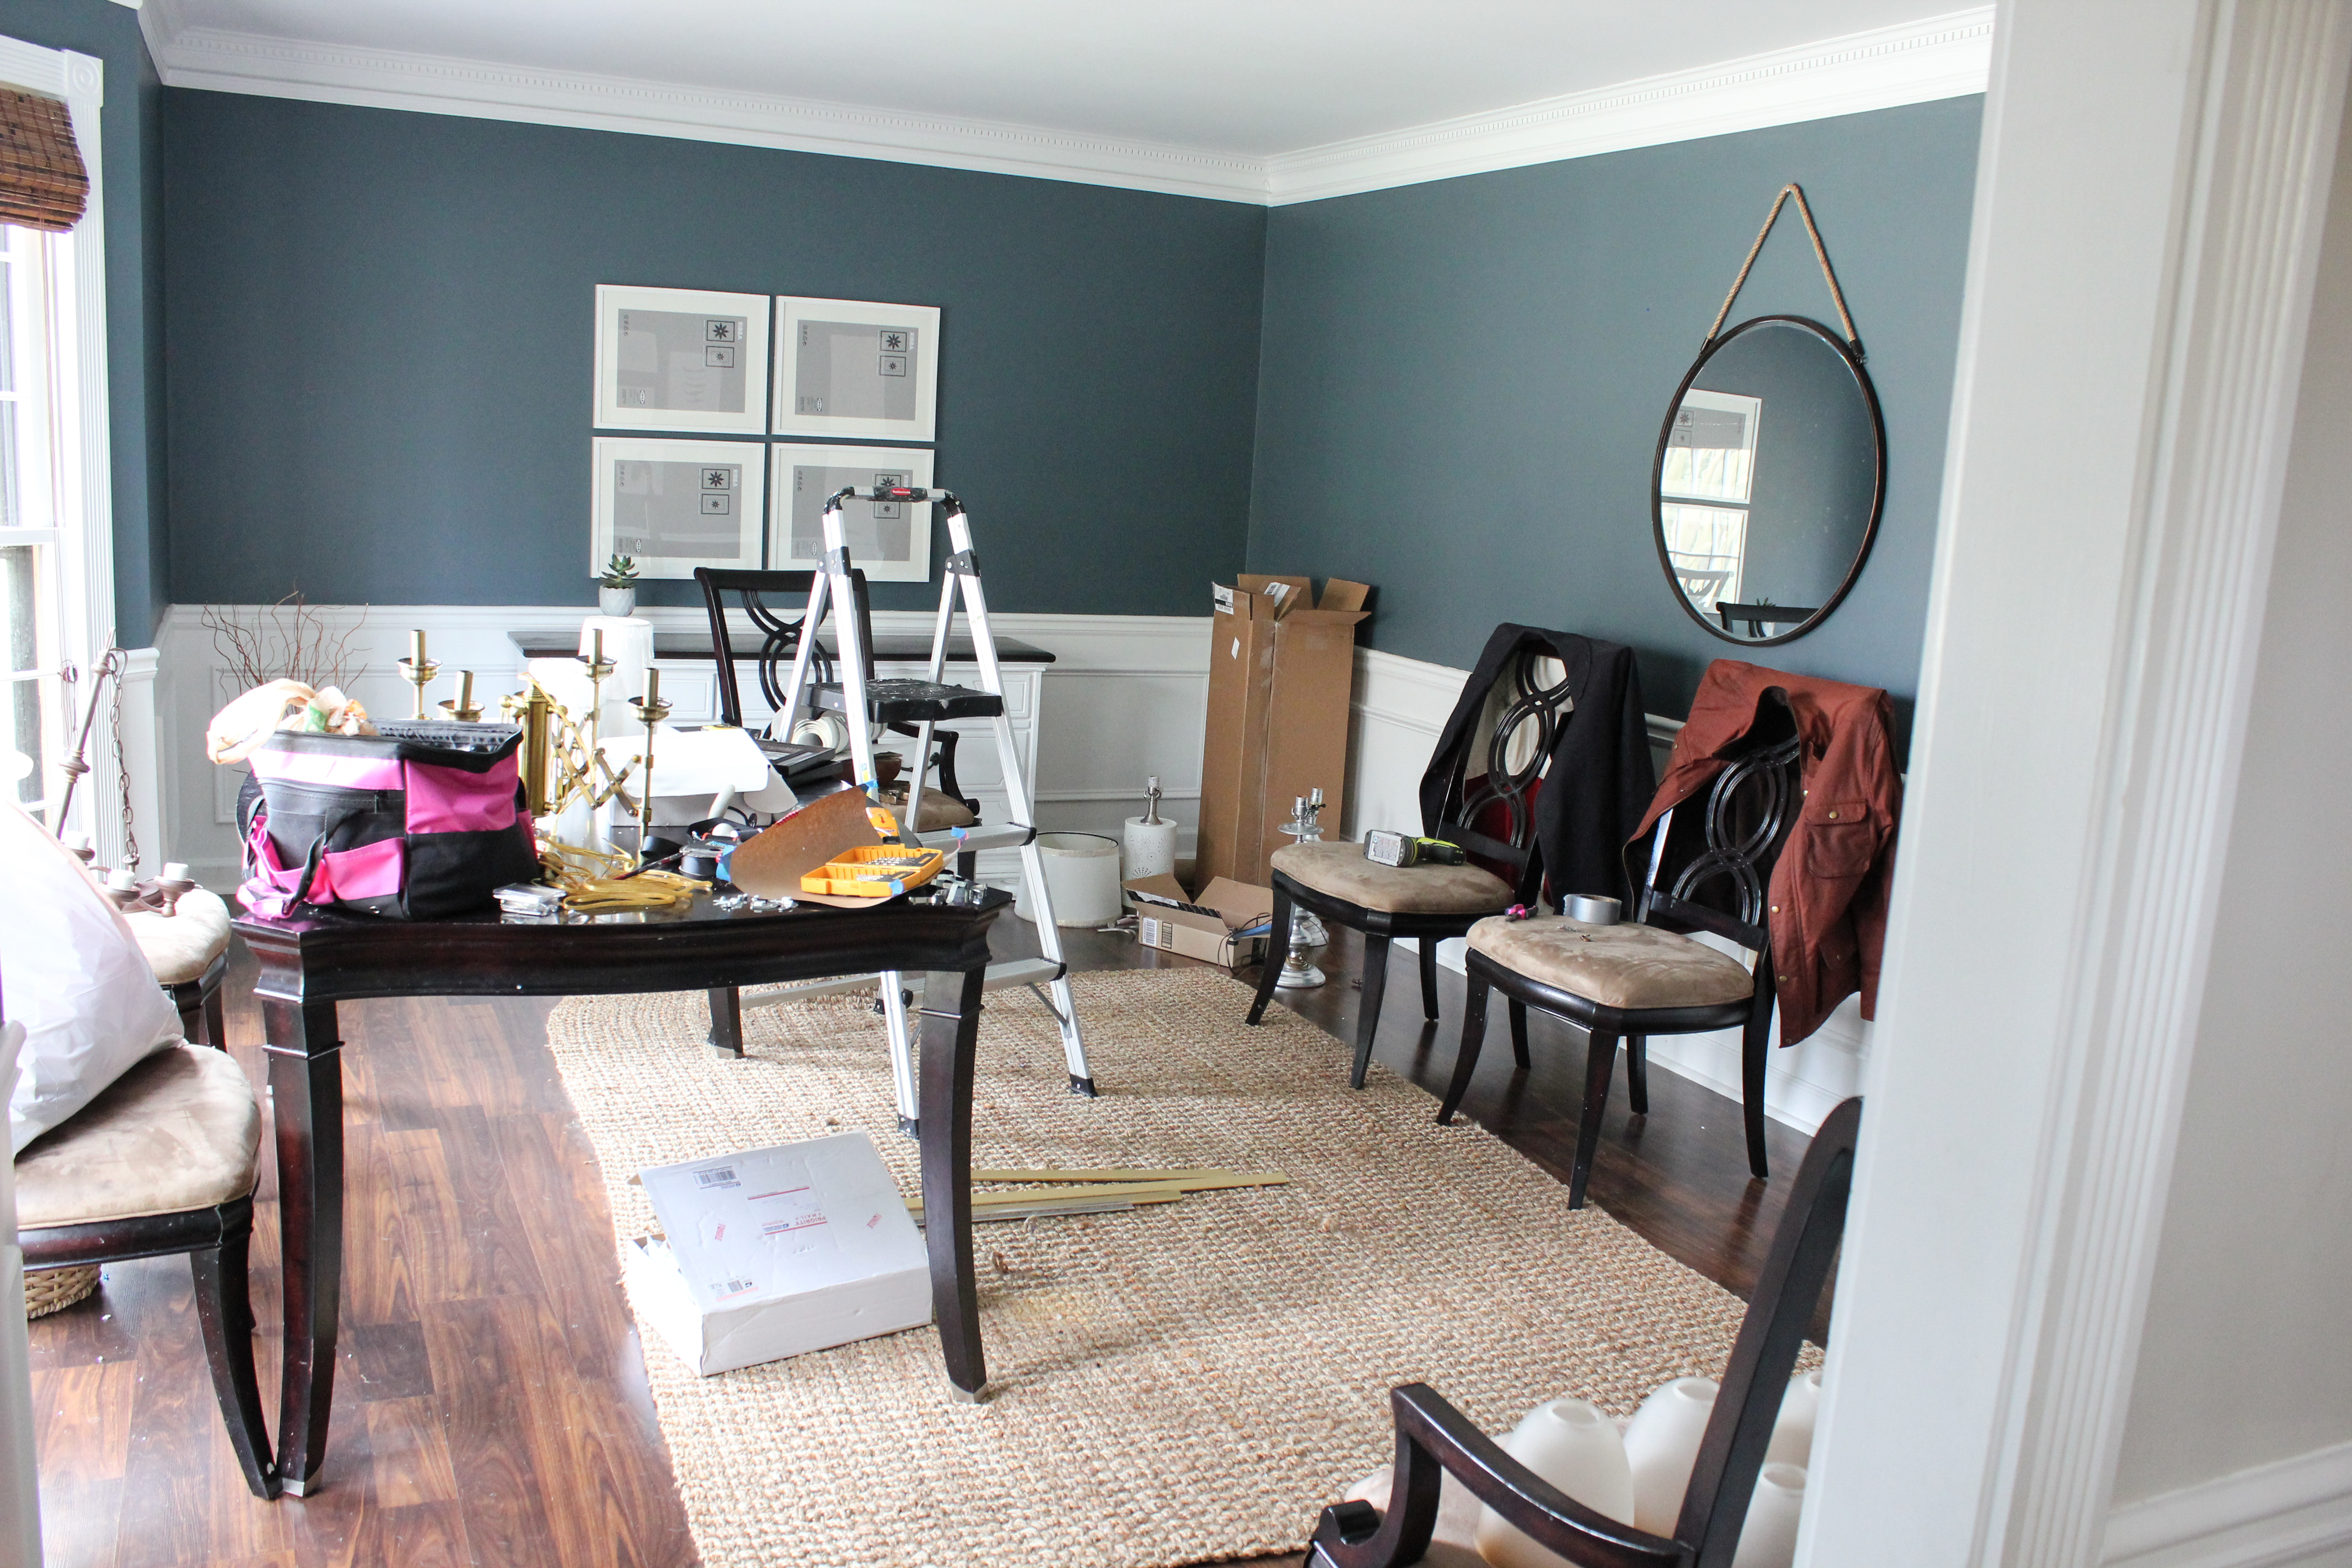 A behind the scenes look at our dining room makeover.